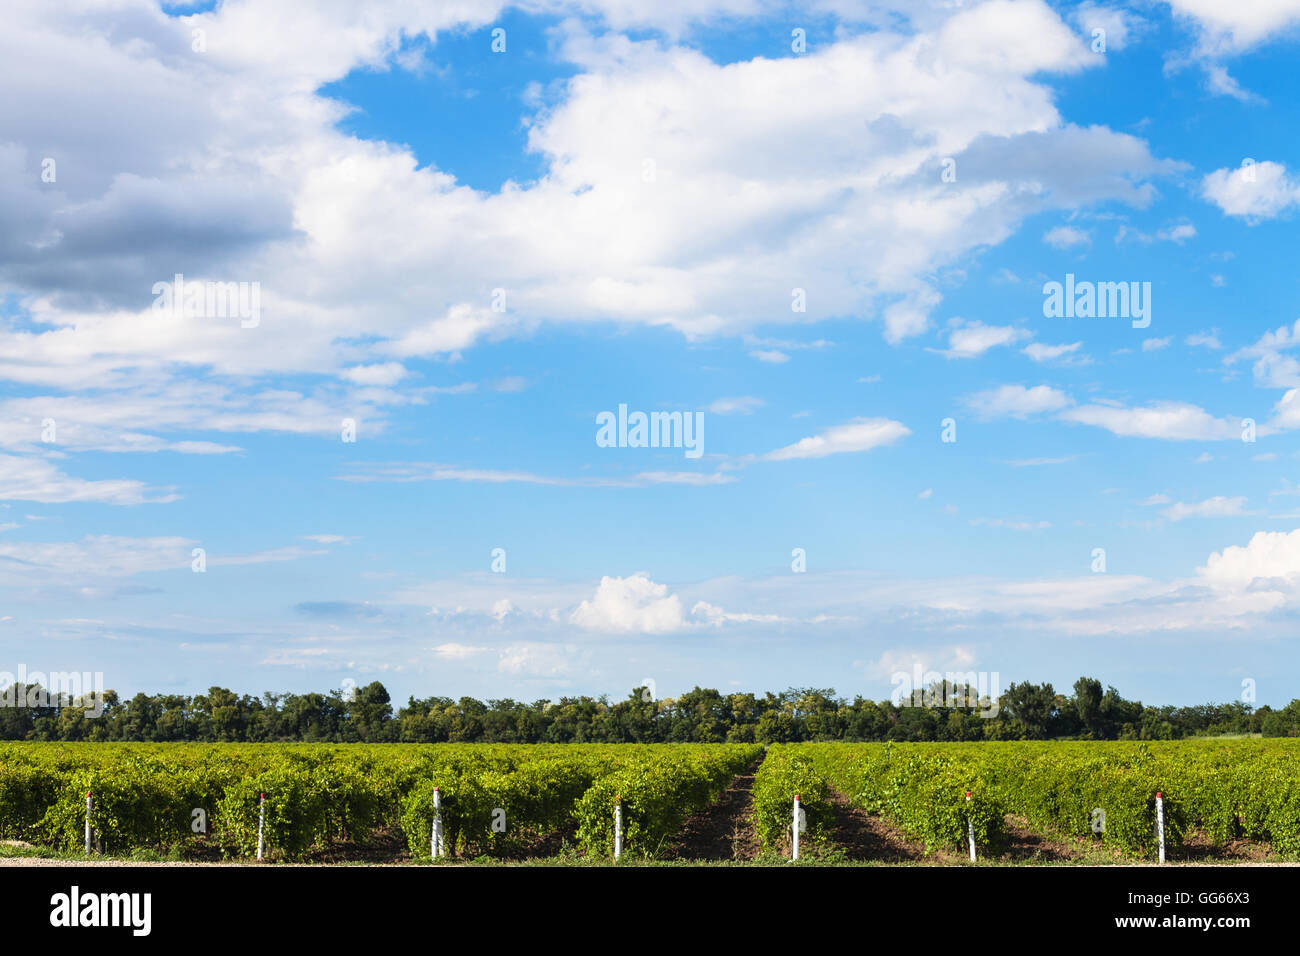 blue sky with white clouds over vineyards in sunny summer day, Taman - Phanagoria vine region, Kuban, Russia Stock Photo